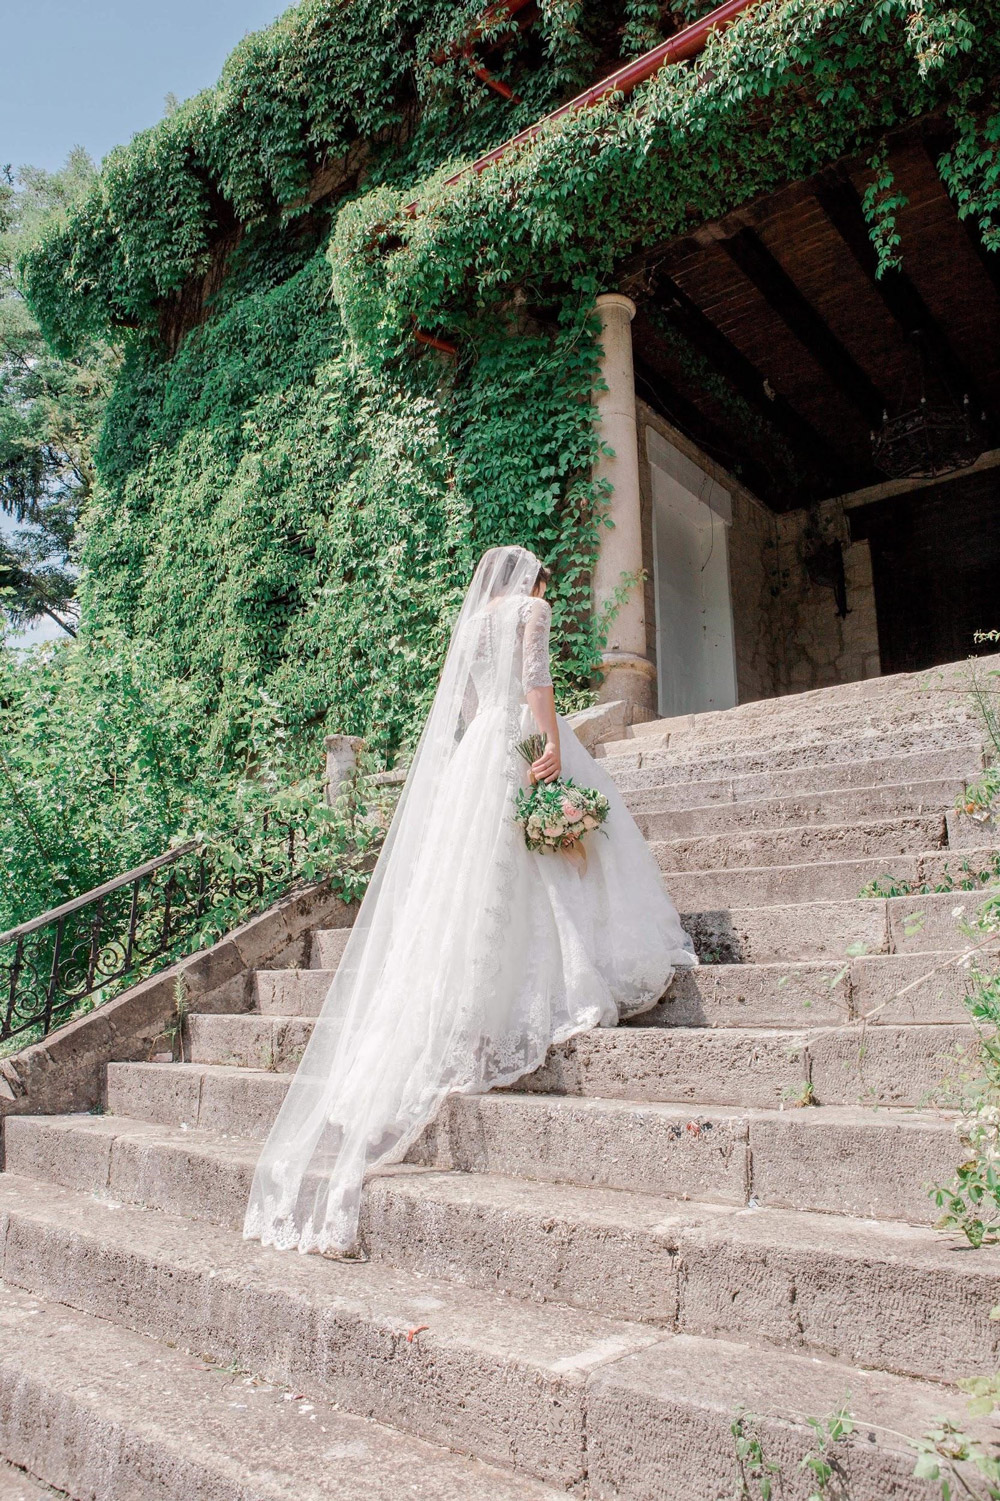 5 Creative Ways To Deal With Old Wedding Gowns